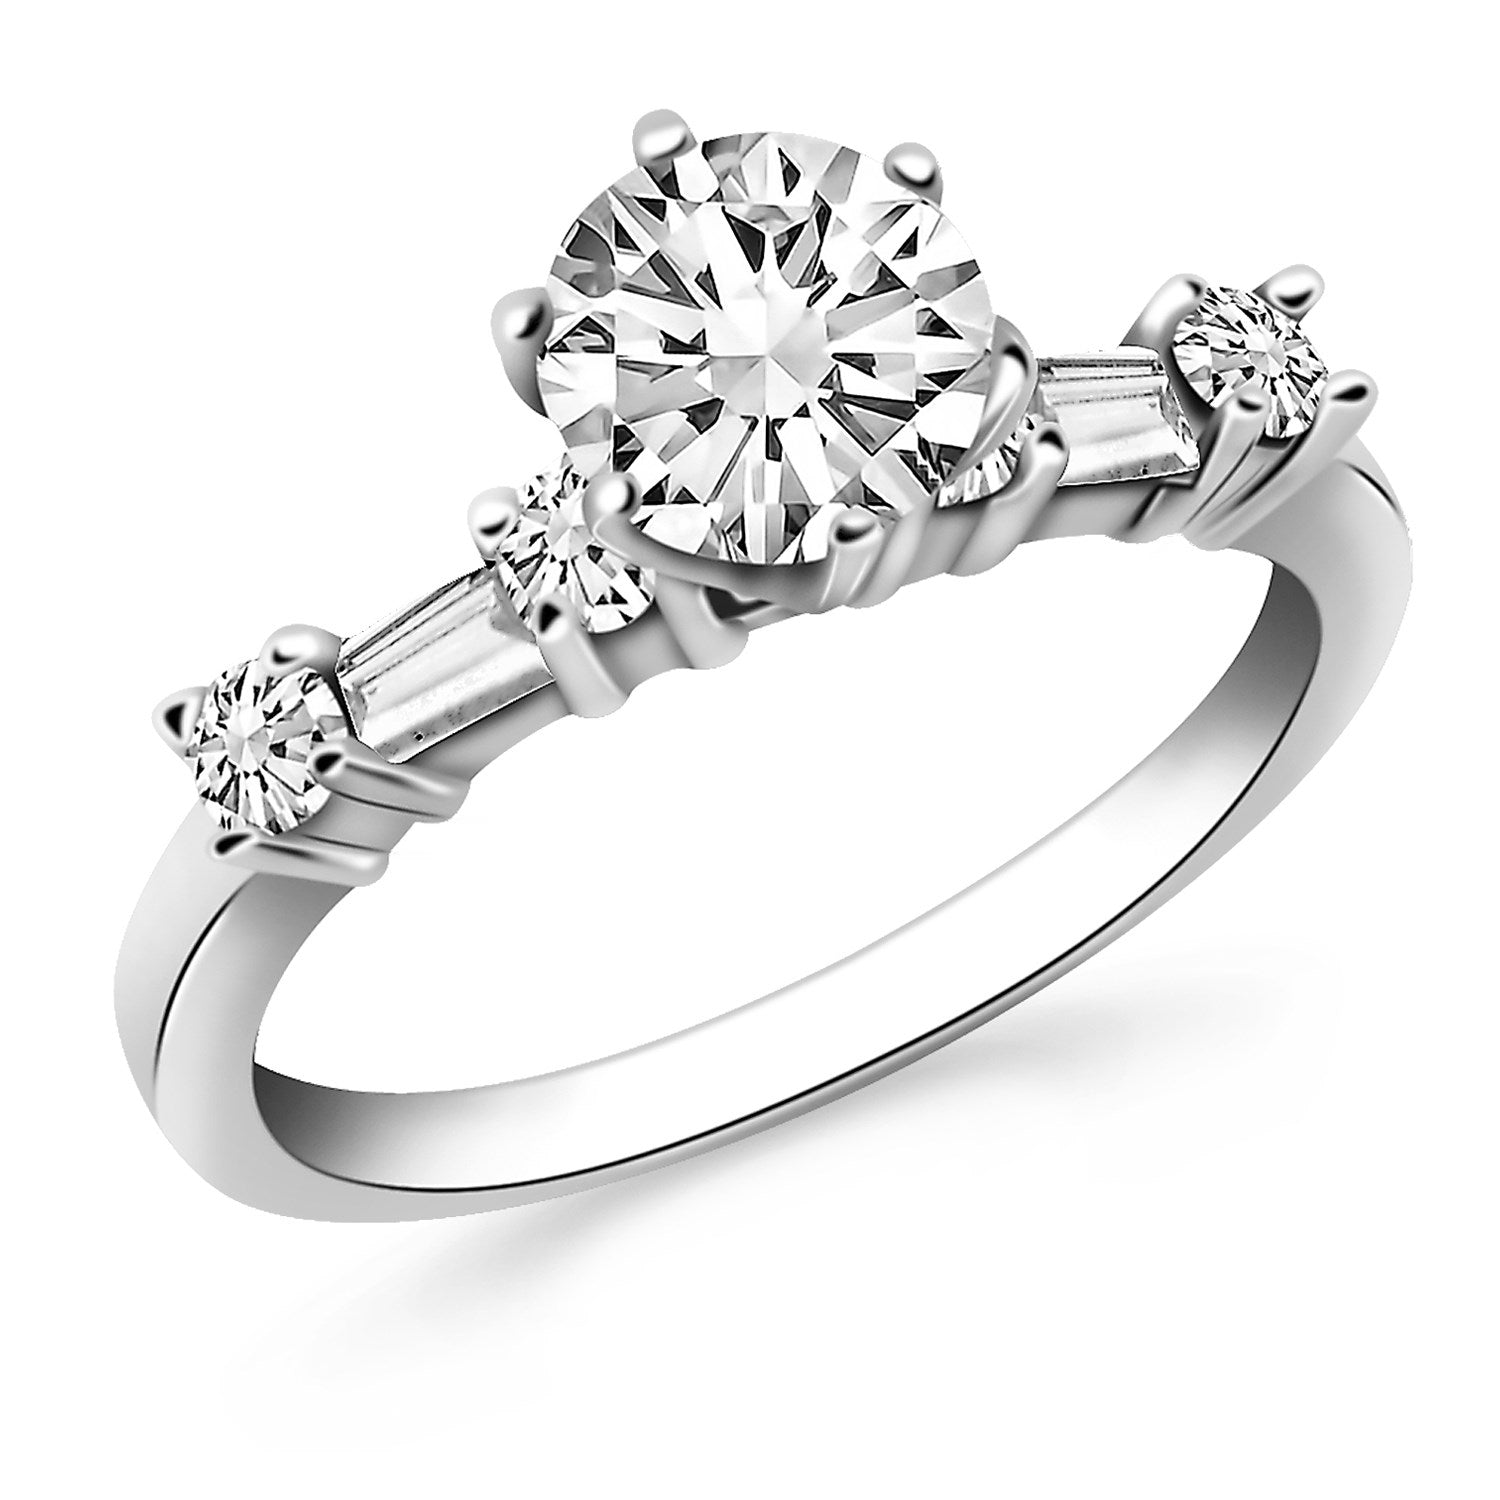 14k White Gold Engagement Ring with Round and Baguette Diamonds